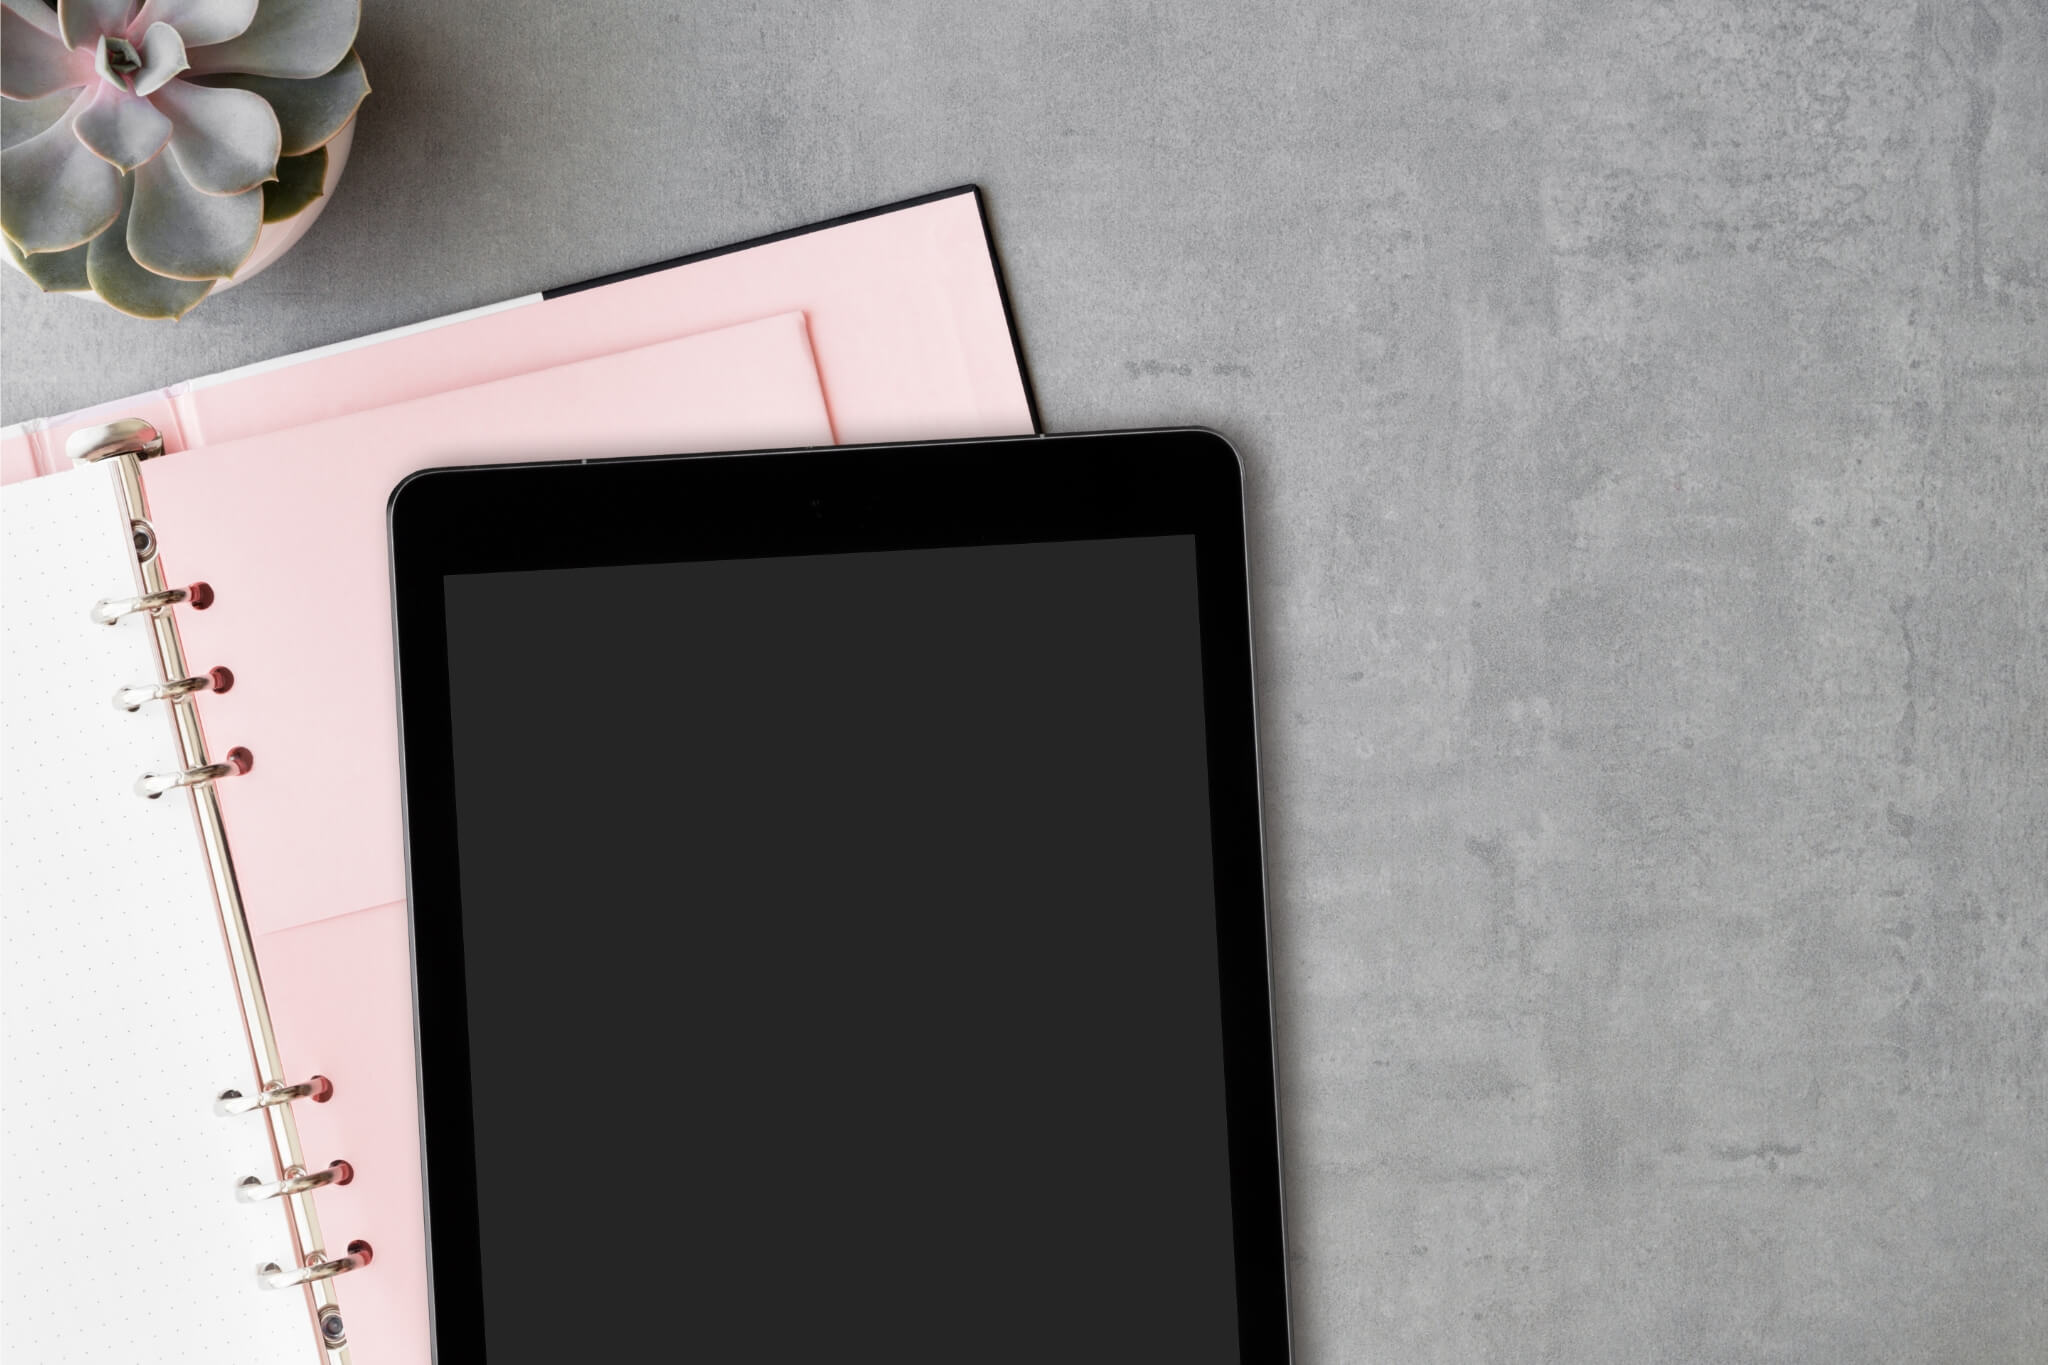 Tablet on top of a feminine and delicate pink agenda and an artificial plant